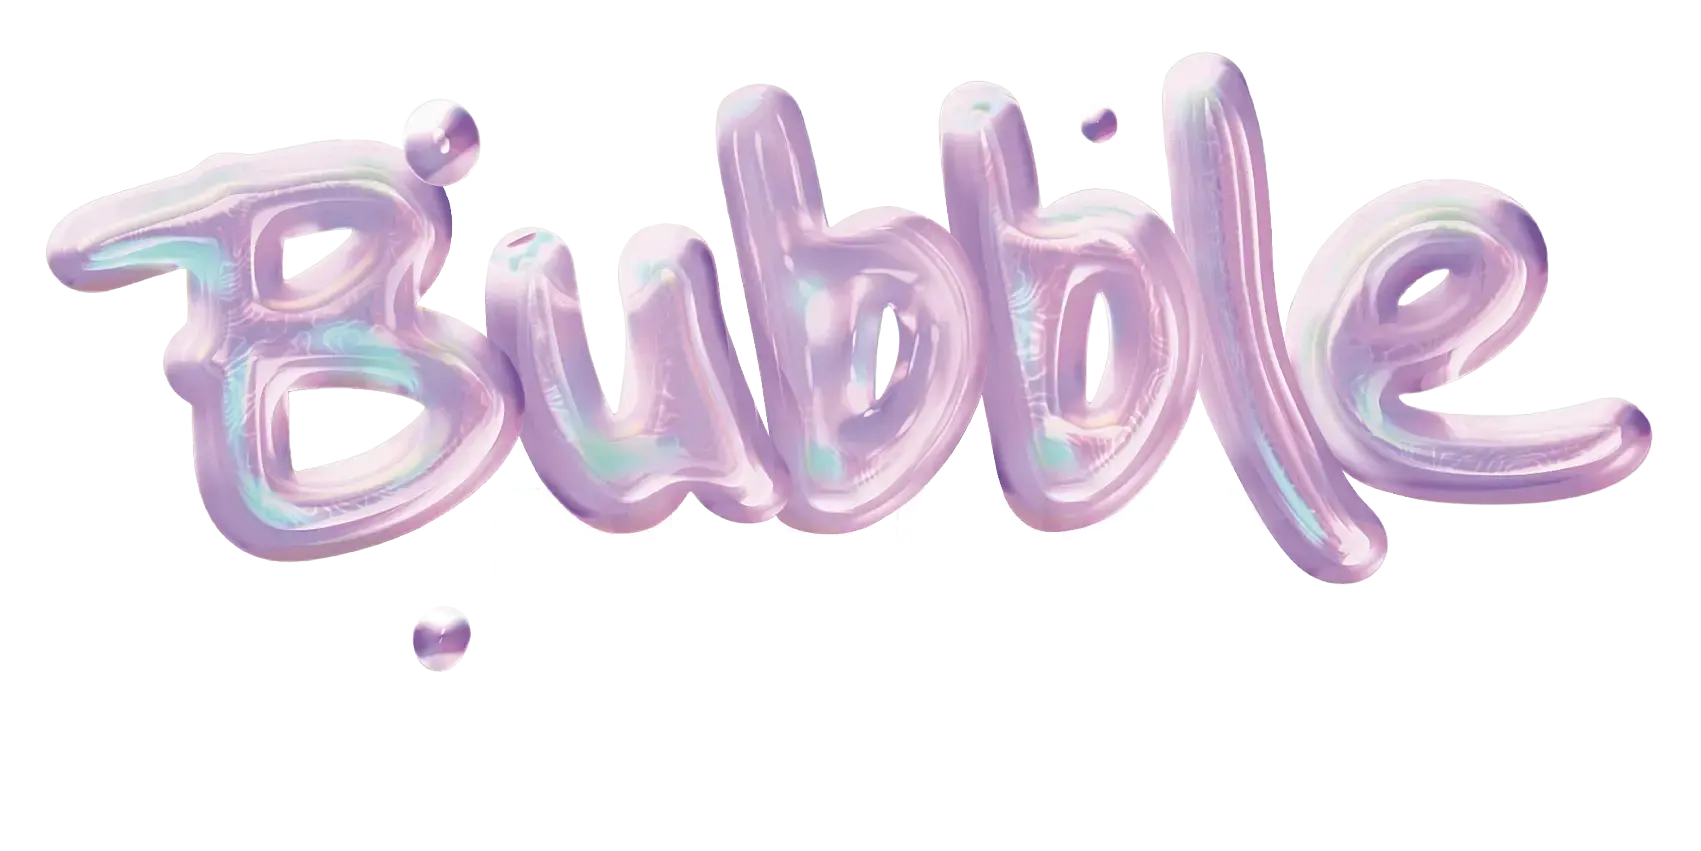 BUBBLE PLANET London: An Immersive Experience